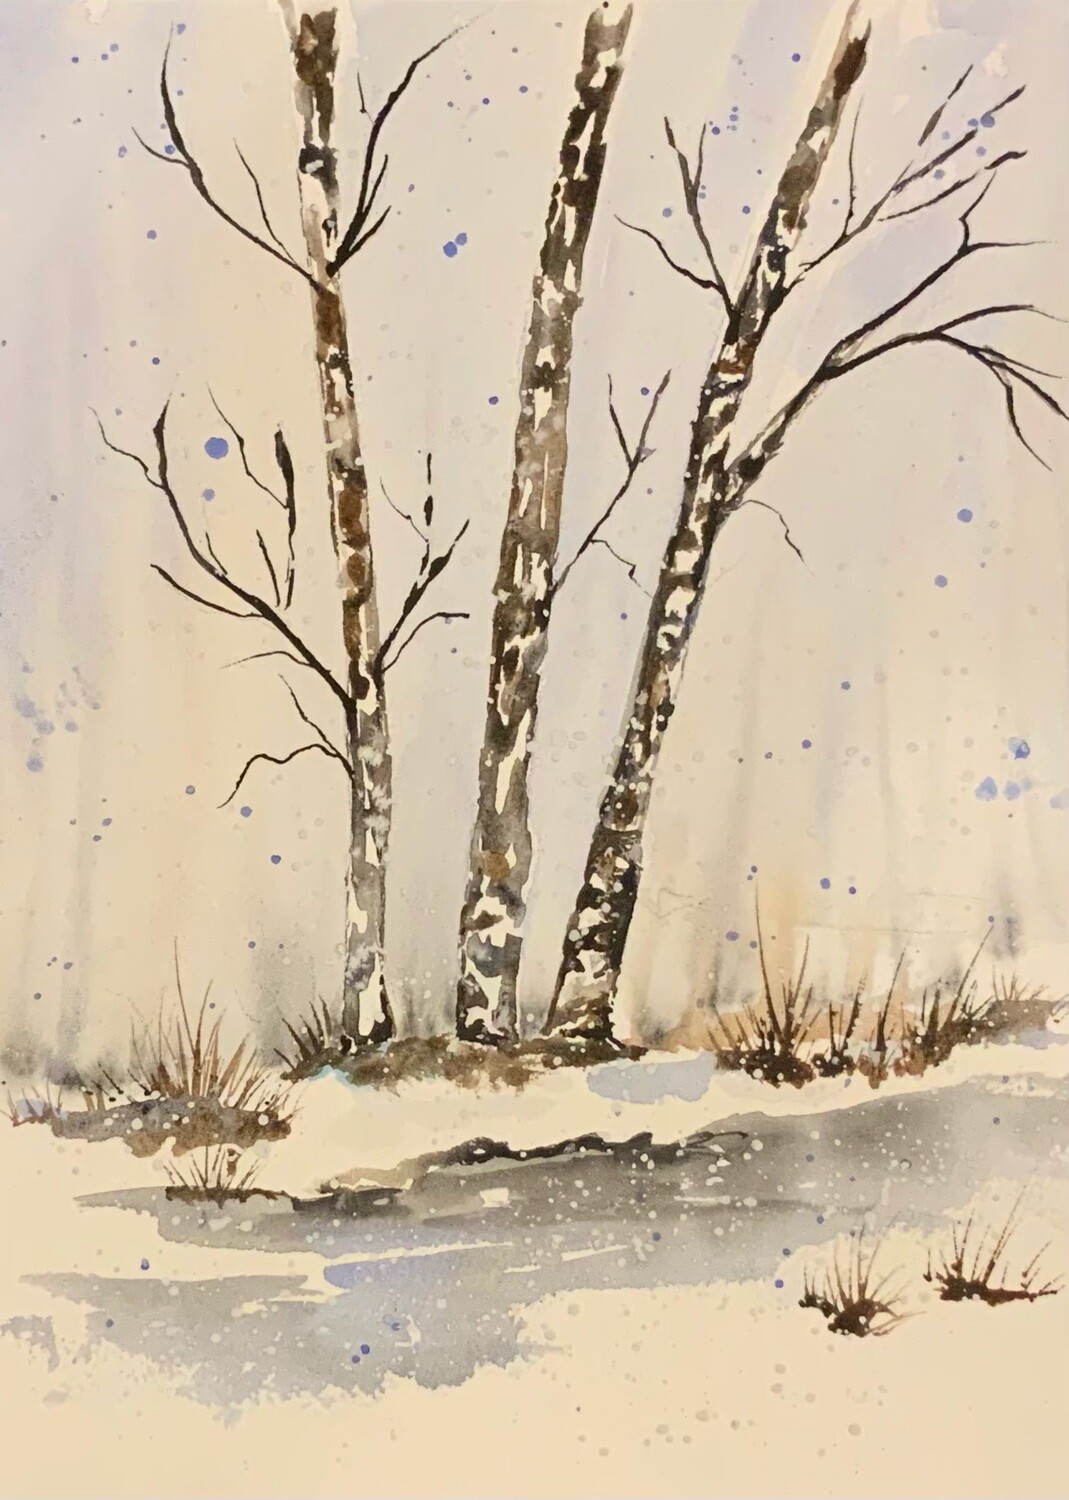 "In a Calm Place" Birch trees, watercolor painting